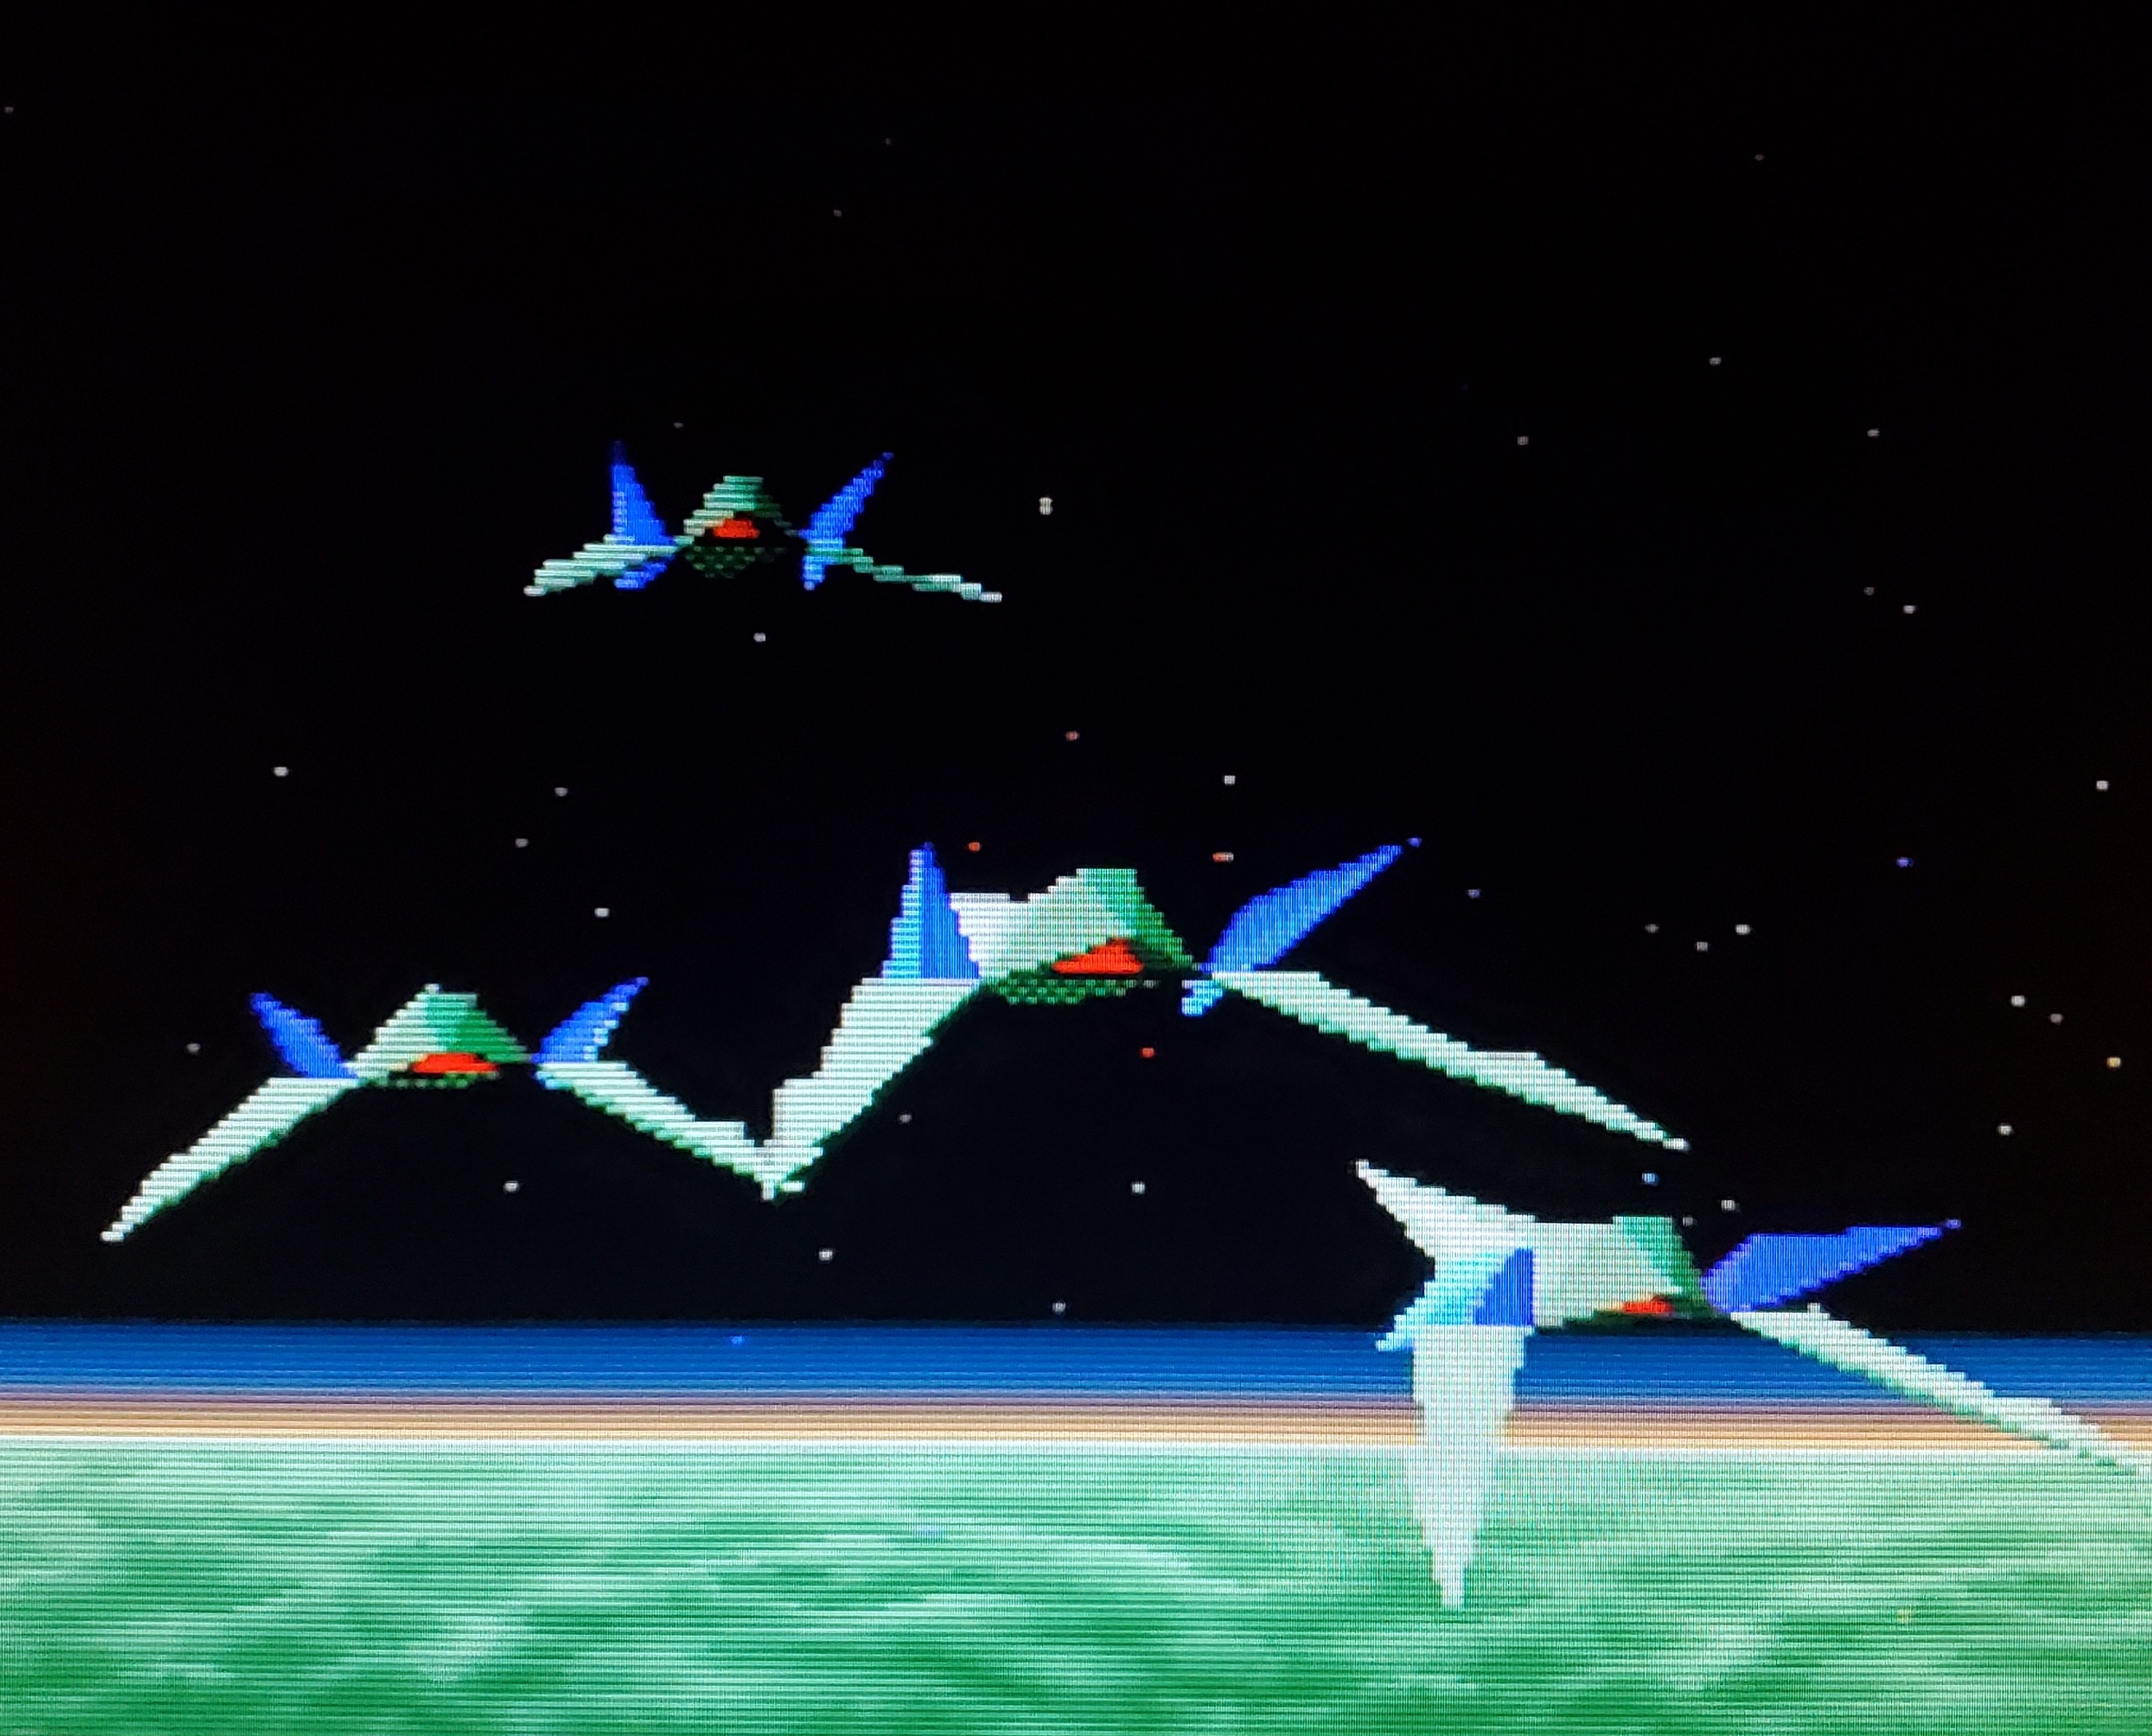 Star Fox SNES: The Struggle is Real · Retrospective · Give me a